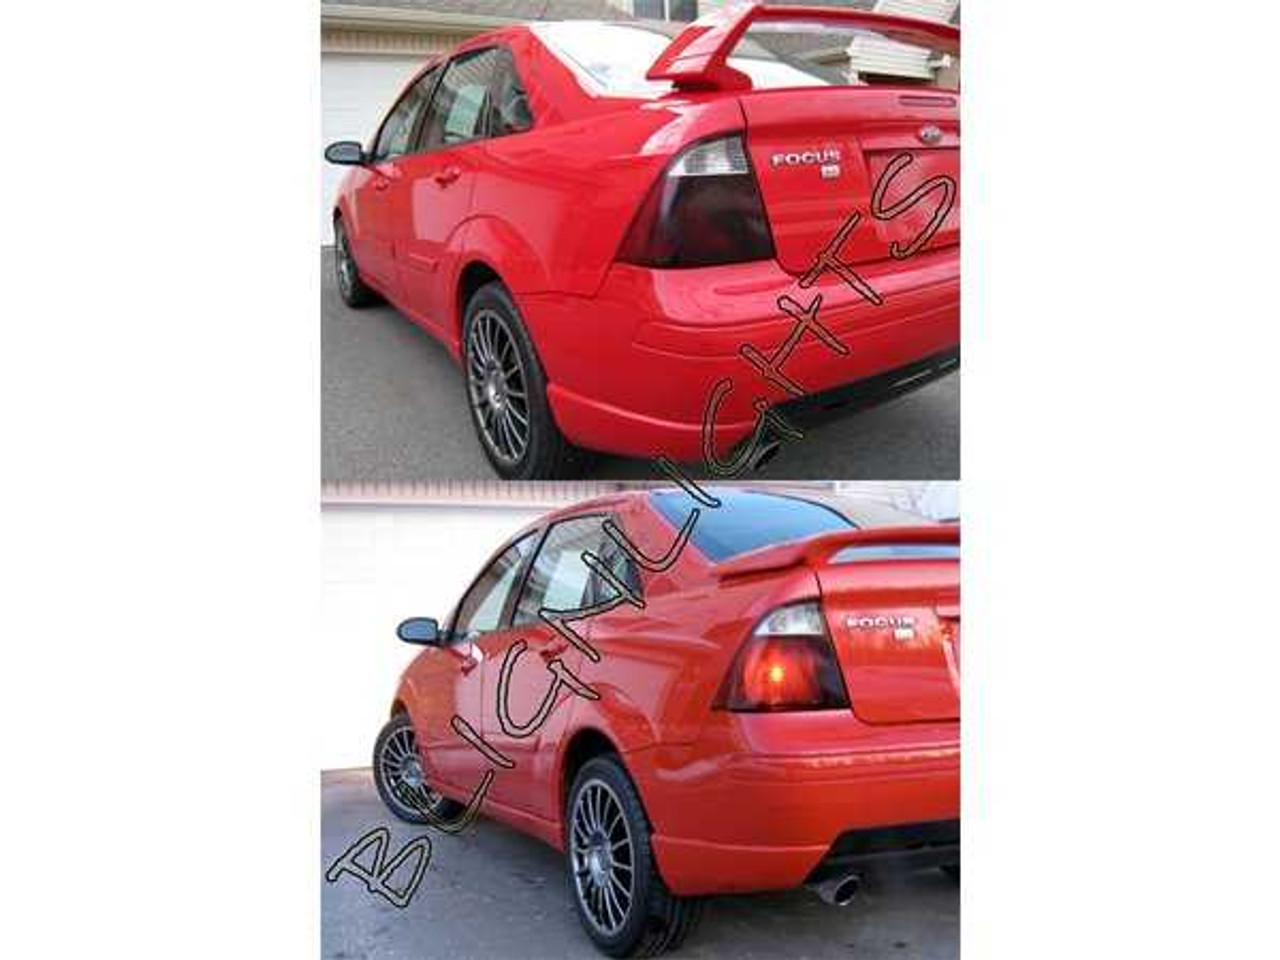 Chevrolet Astra Tinted Tail Lamp Light Overlays Kit Smoked Film Protection